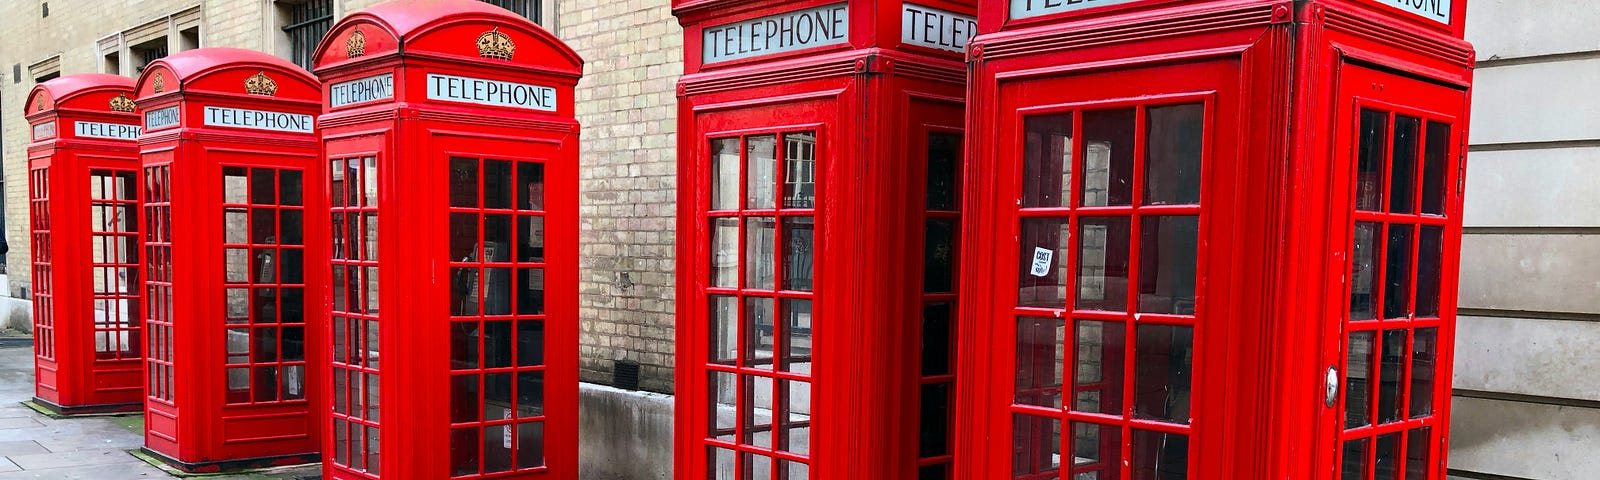 A row of typical English red public phone booths along a street